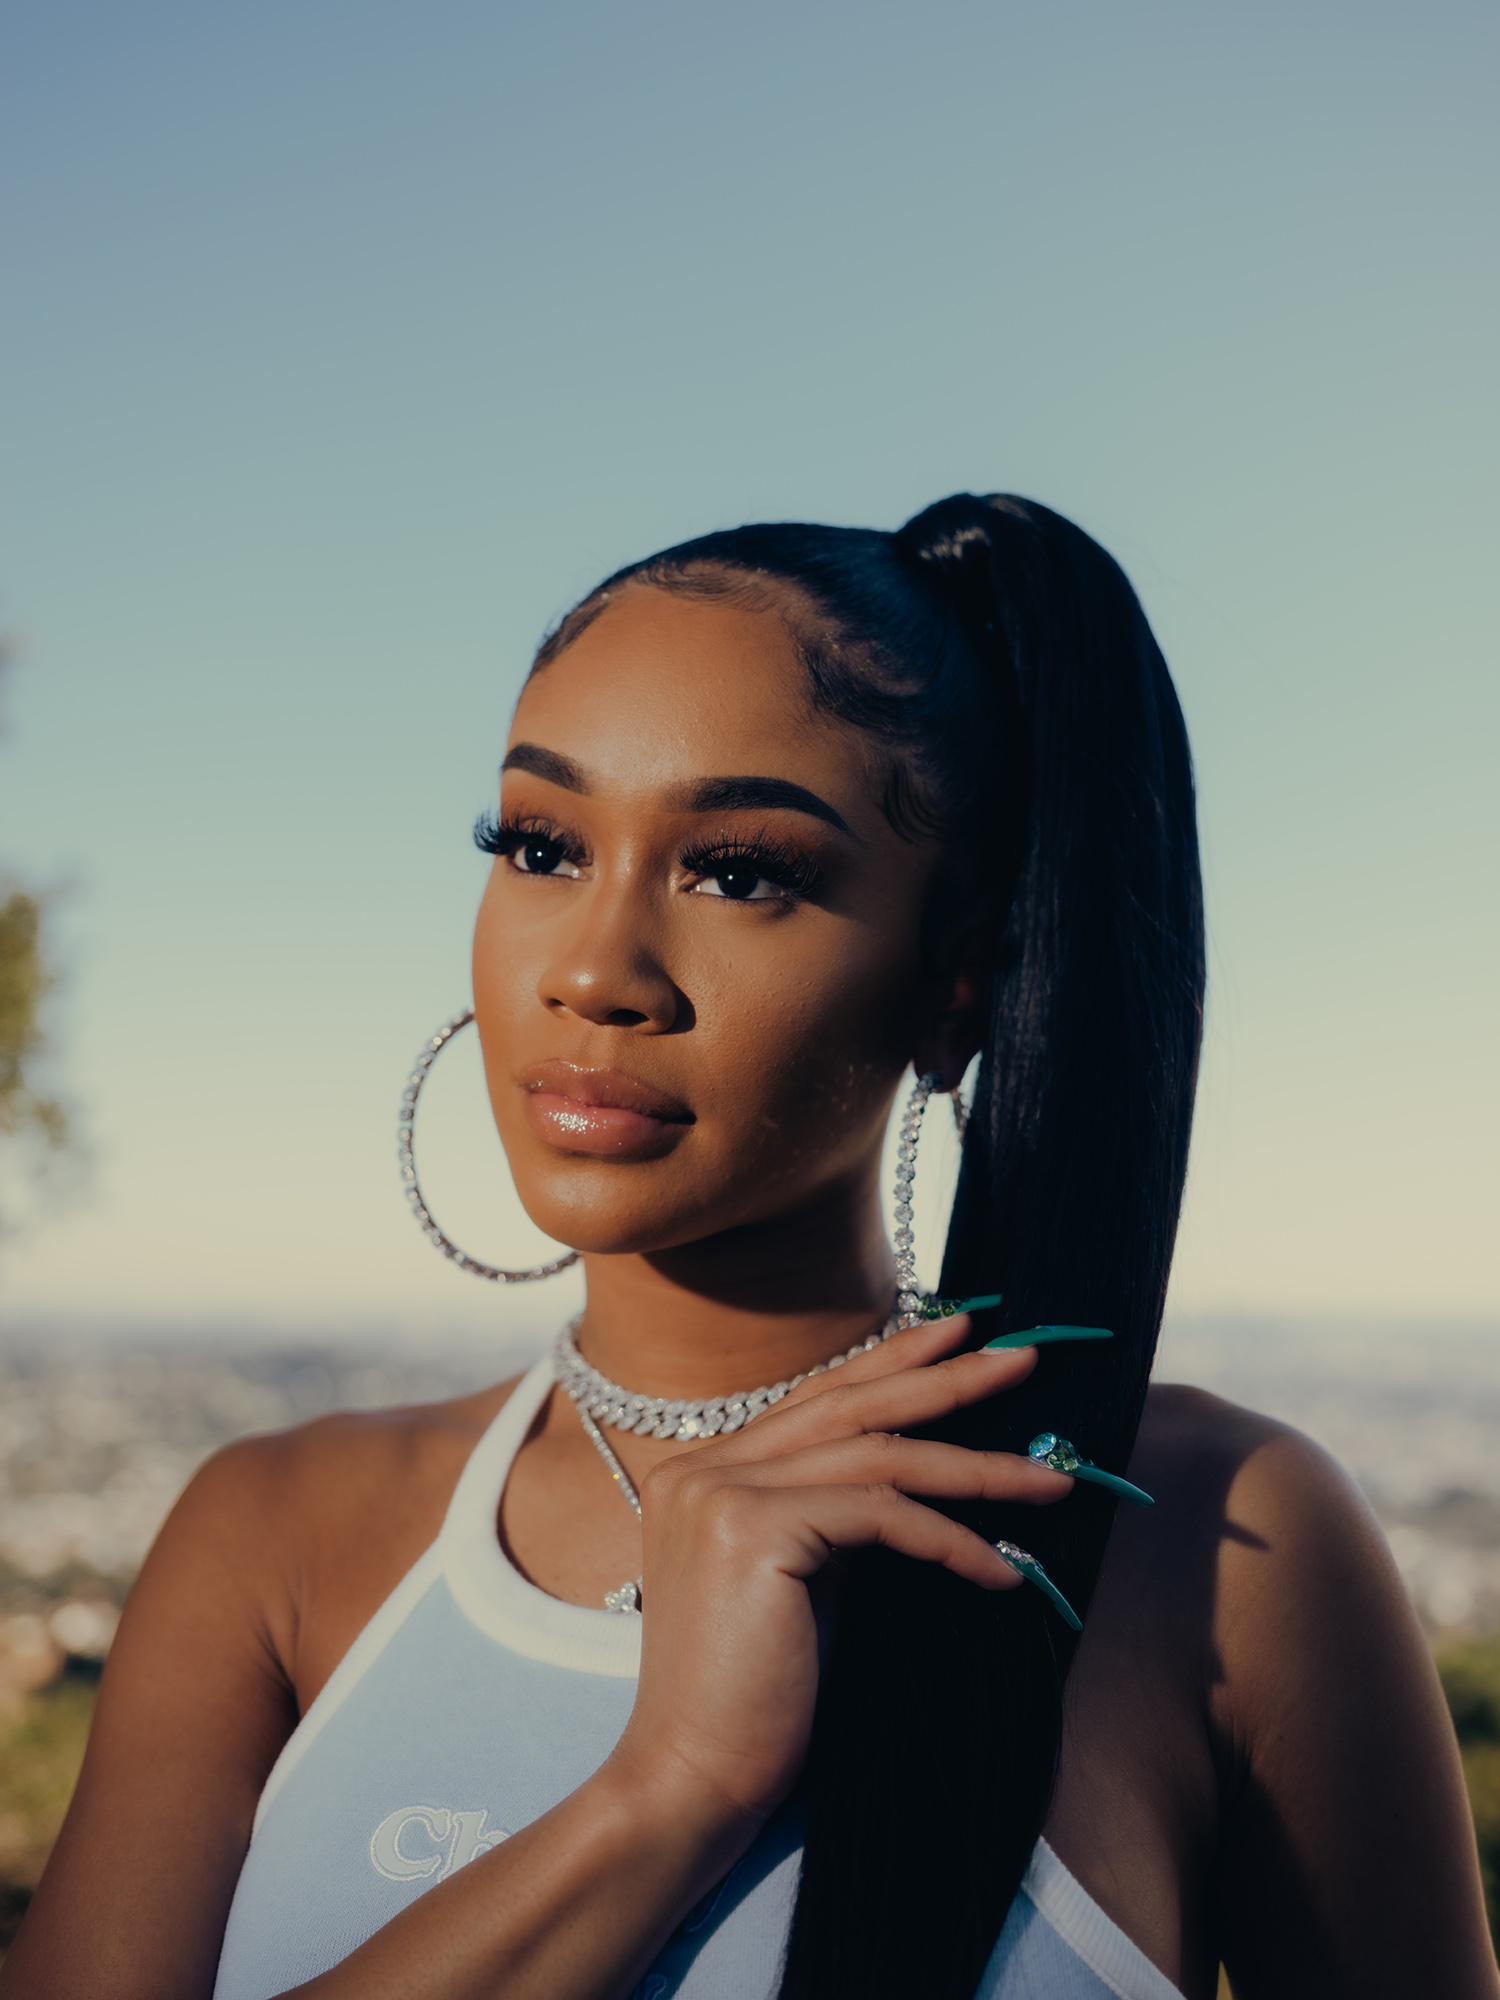 Saweetie Is the OG Icy Girl - VICE